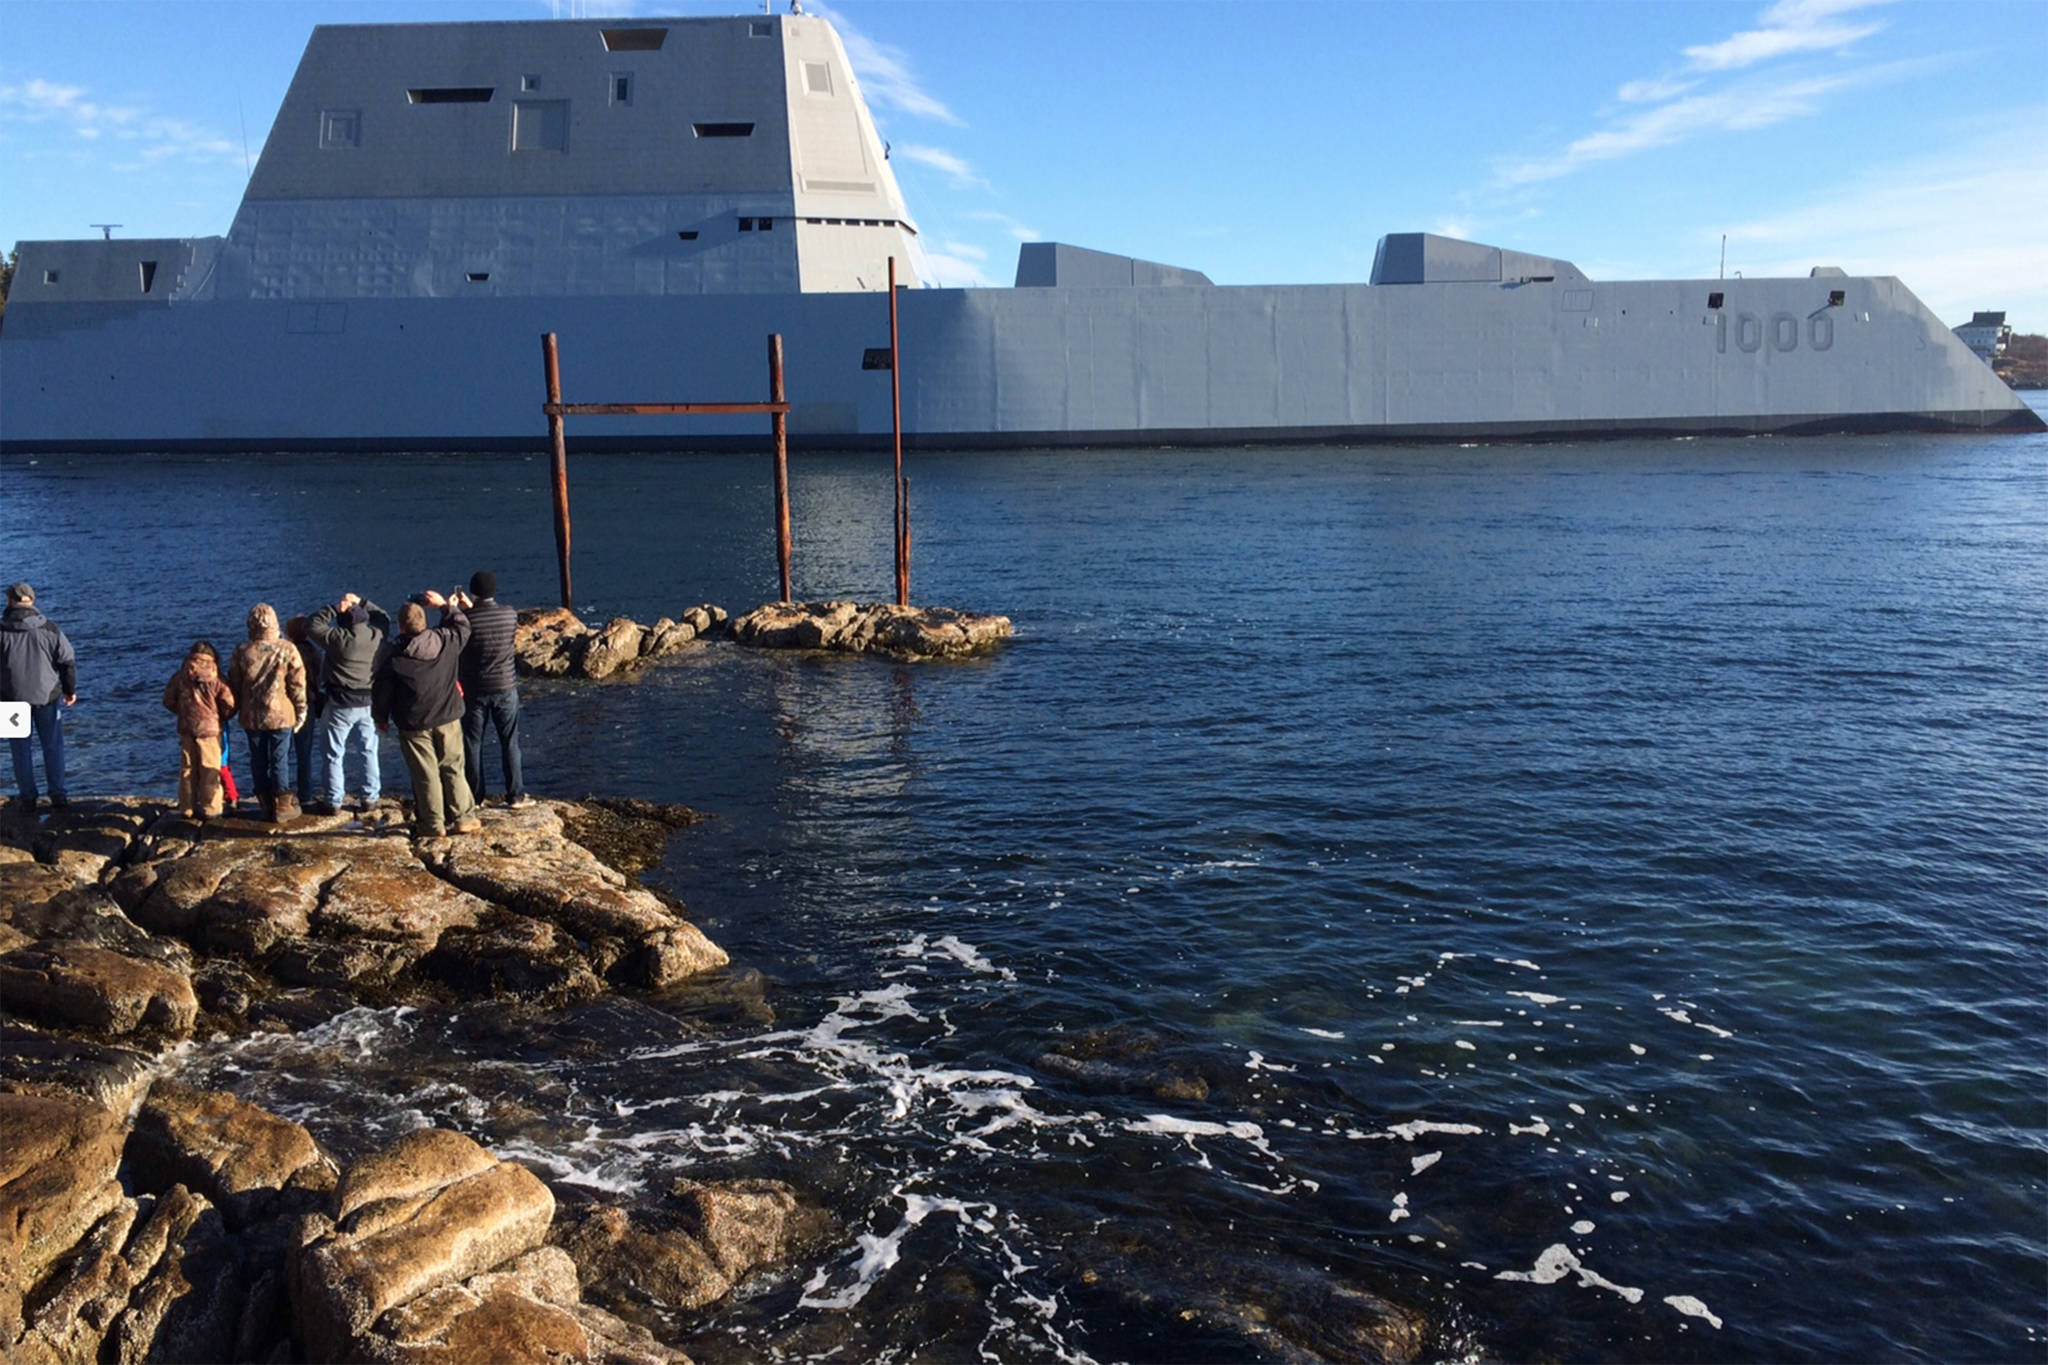 The future USS Zumwalt, pictured here underway for the first time conducting at-sea tests and trials on the Kennebeck River, made a stop in Ketchikan Saturday, March 23. ( Courtesy Photo | U.S. Navy photo)